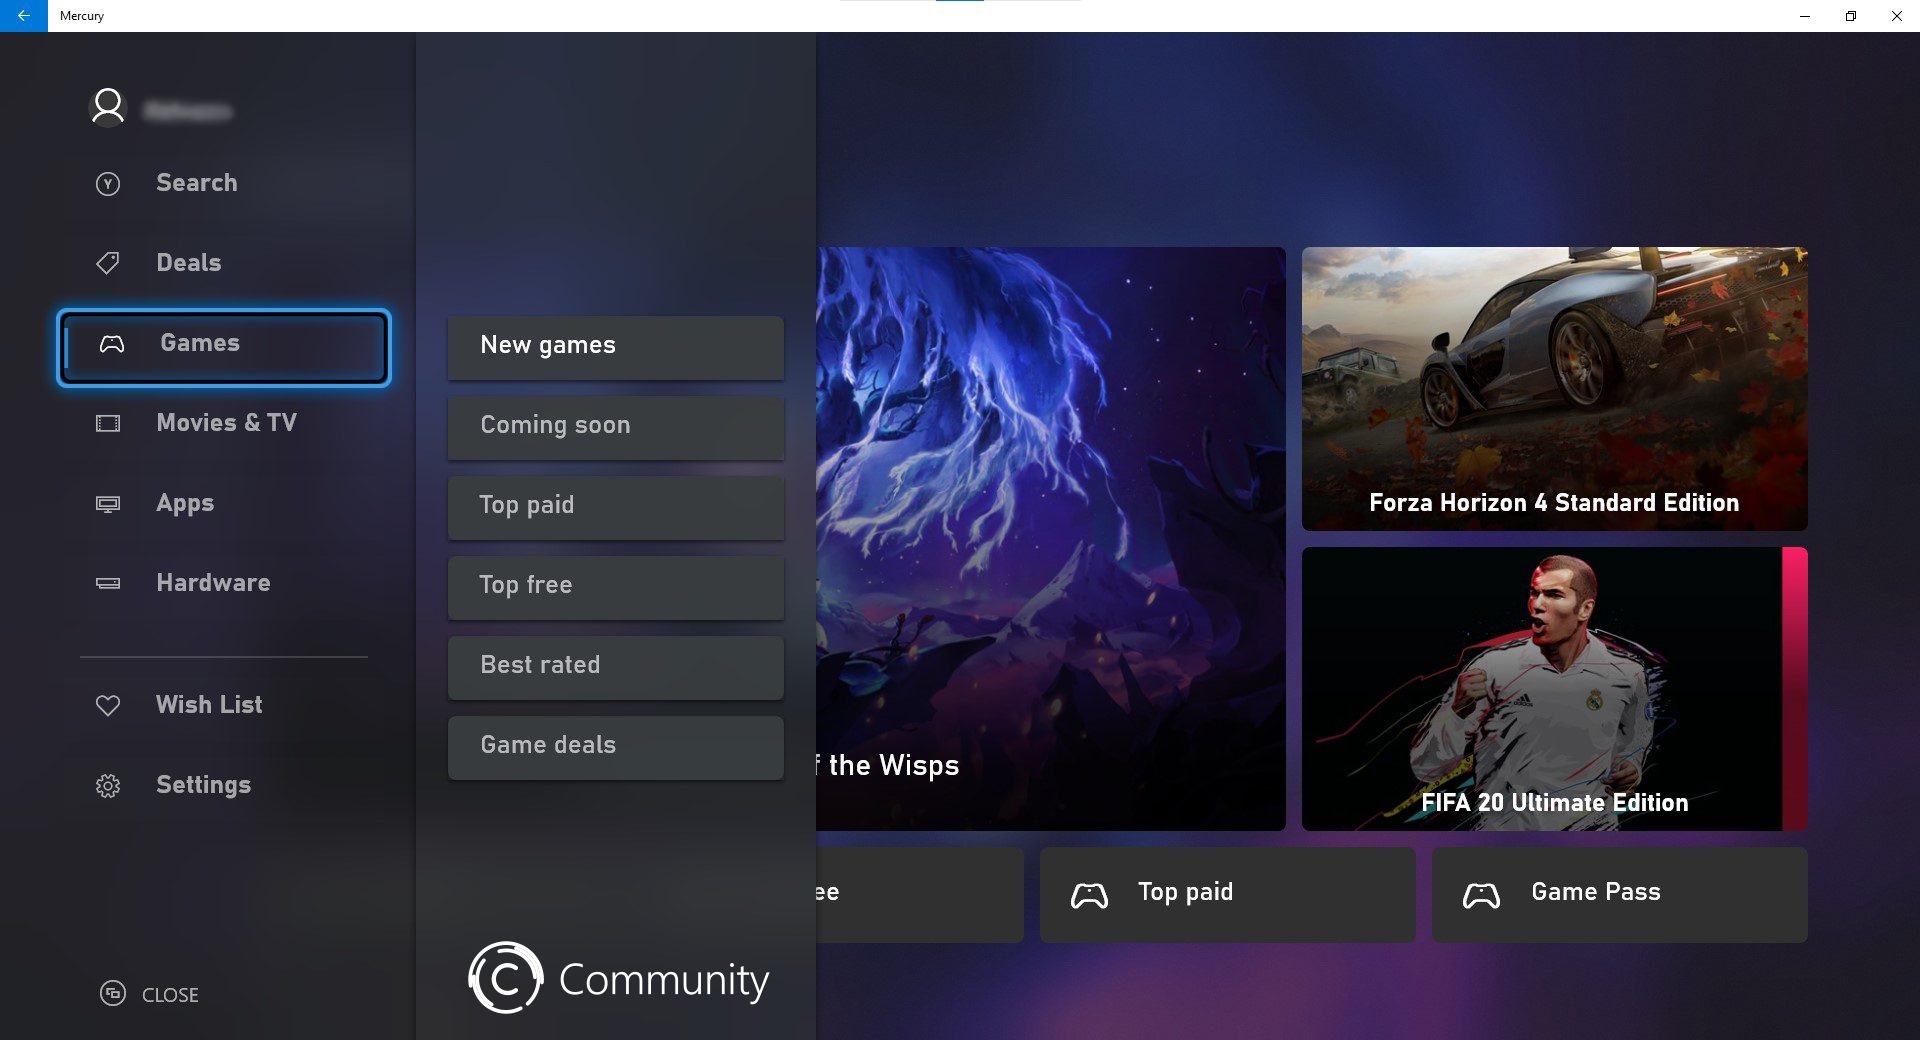 Microsoft’s Project Mercury Xbox Store app leaked and demoed on video